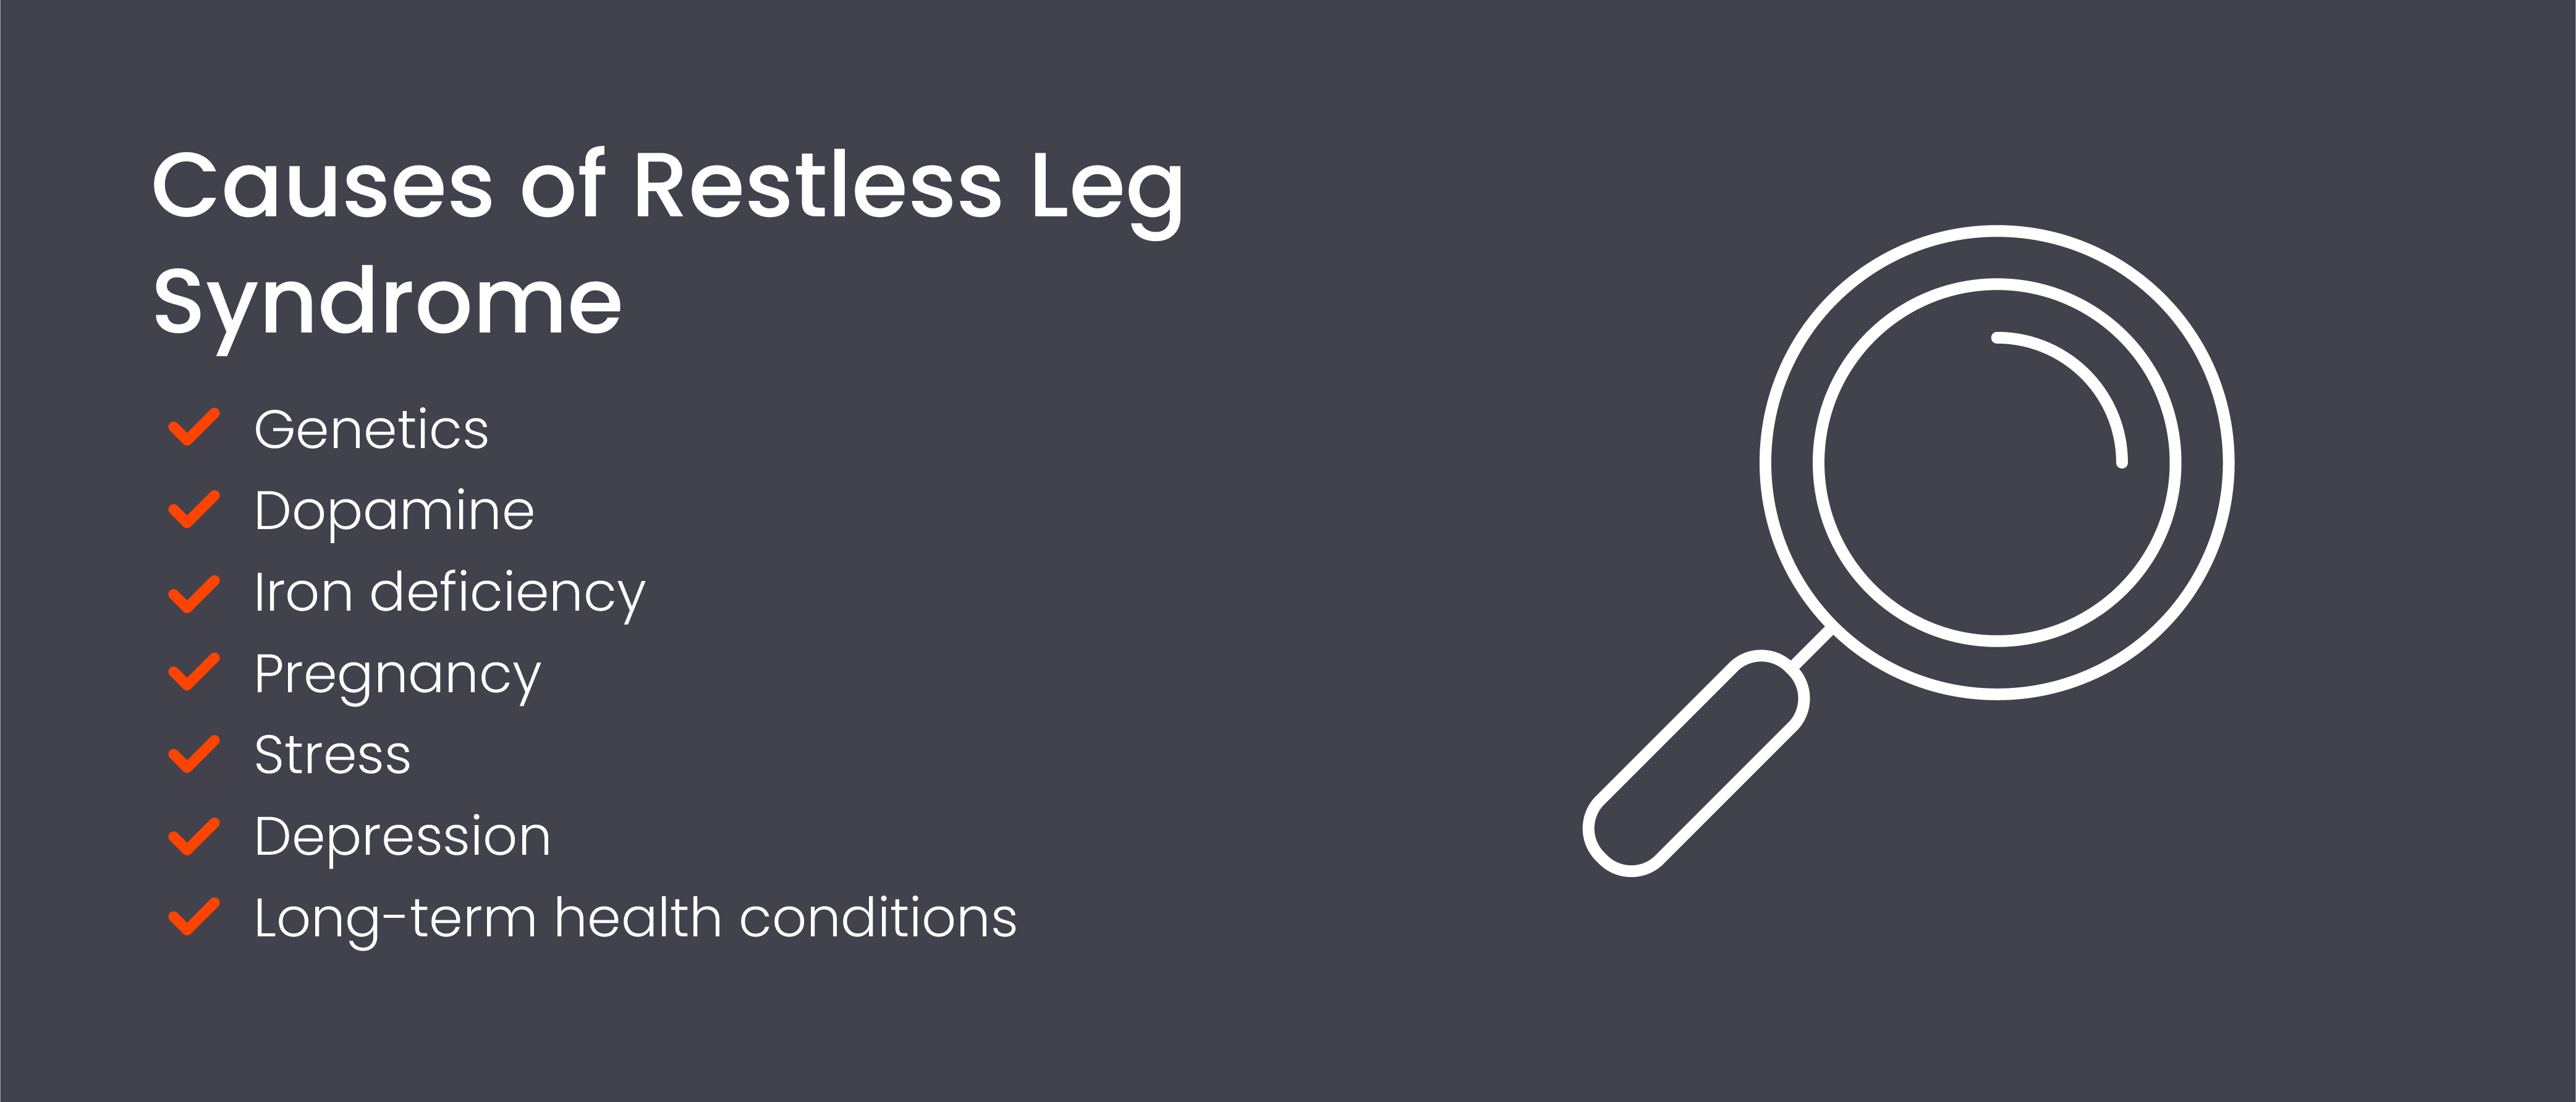 Causes of restless leg syndrome